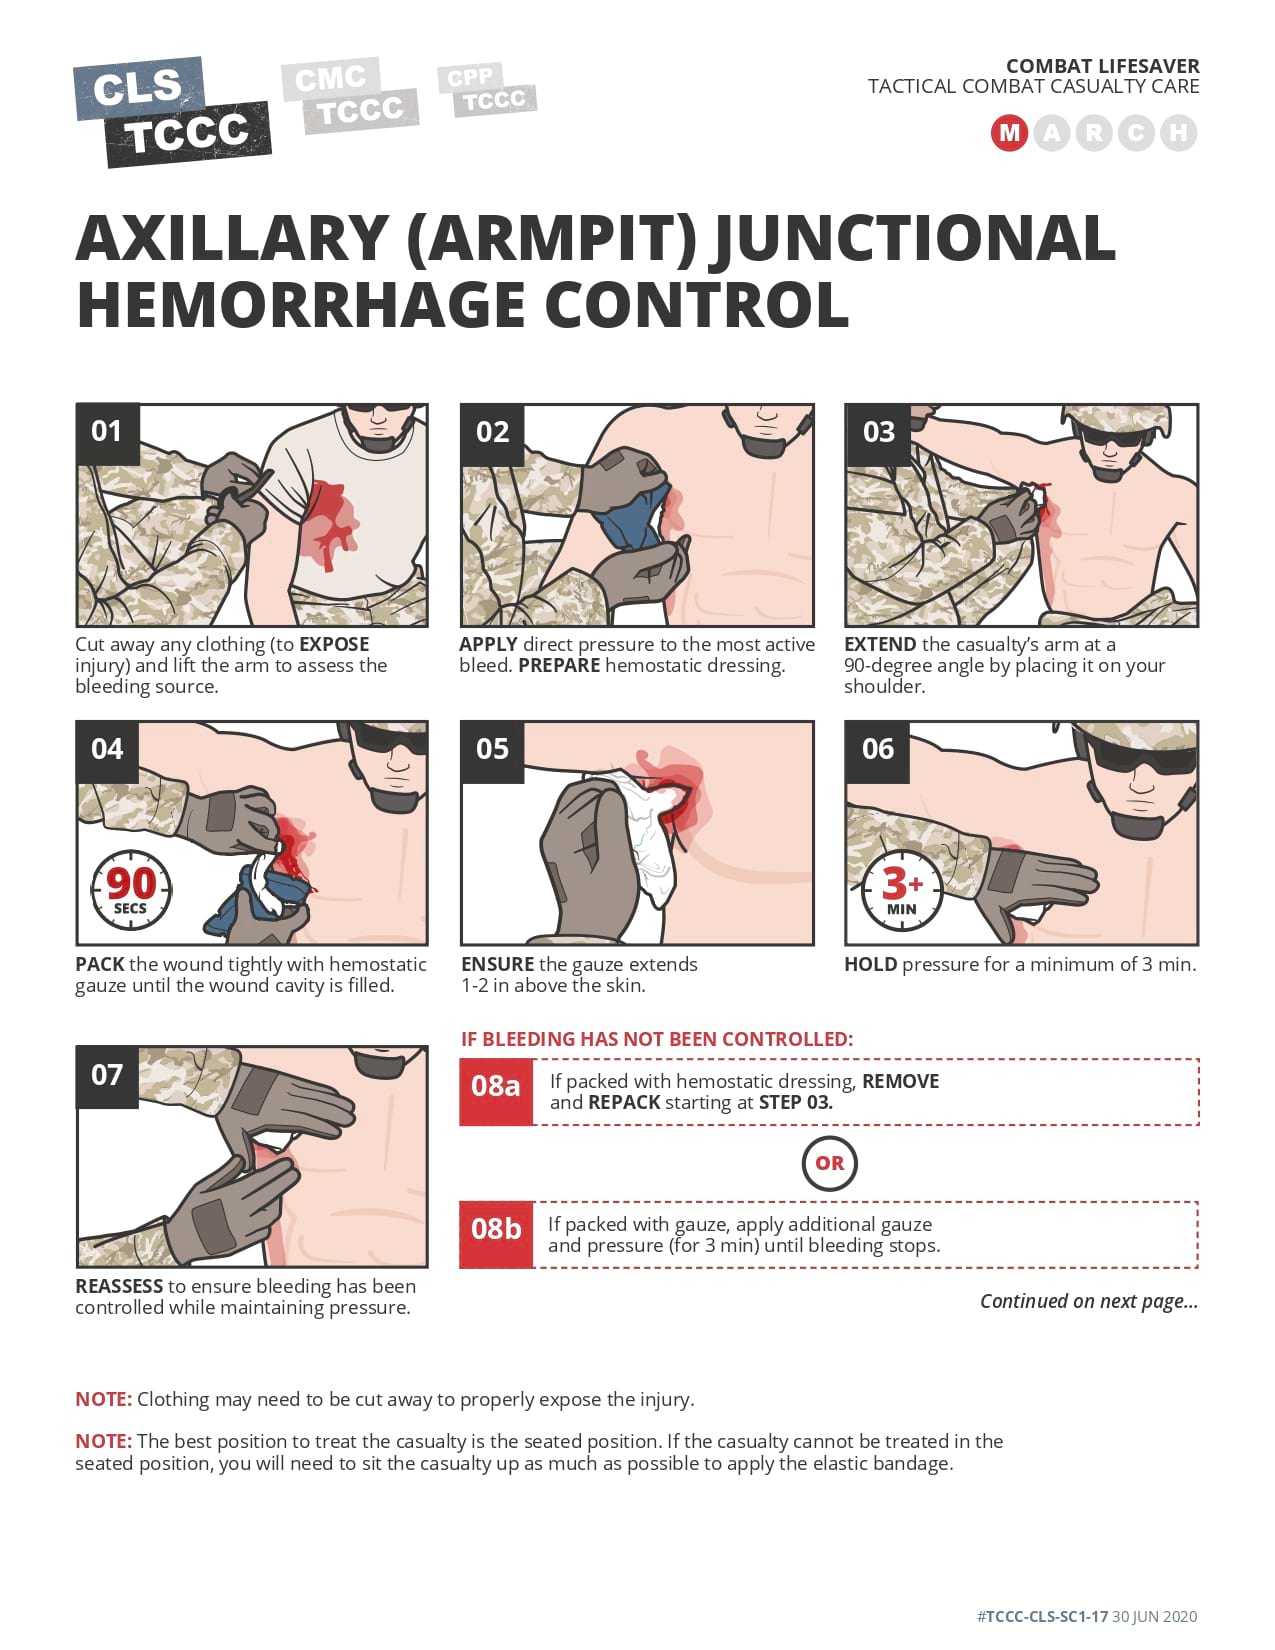 Axillary Junctional Hemorrhage Control, page 1